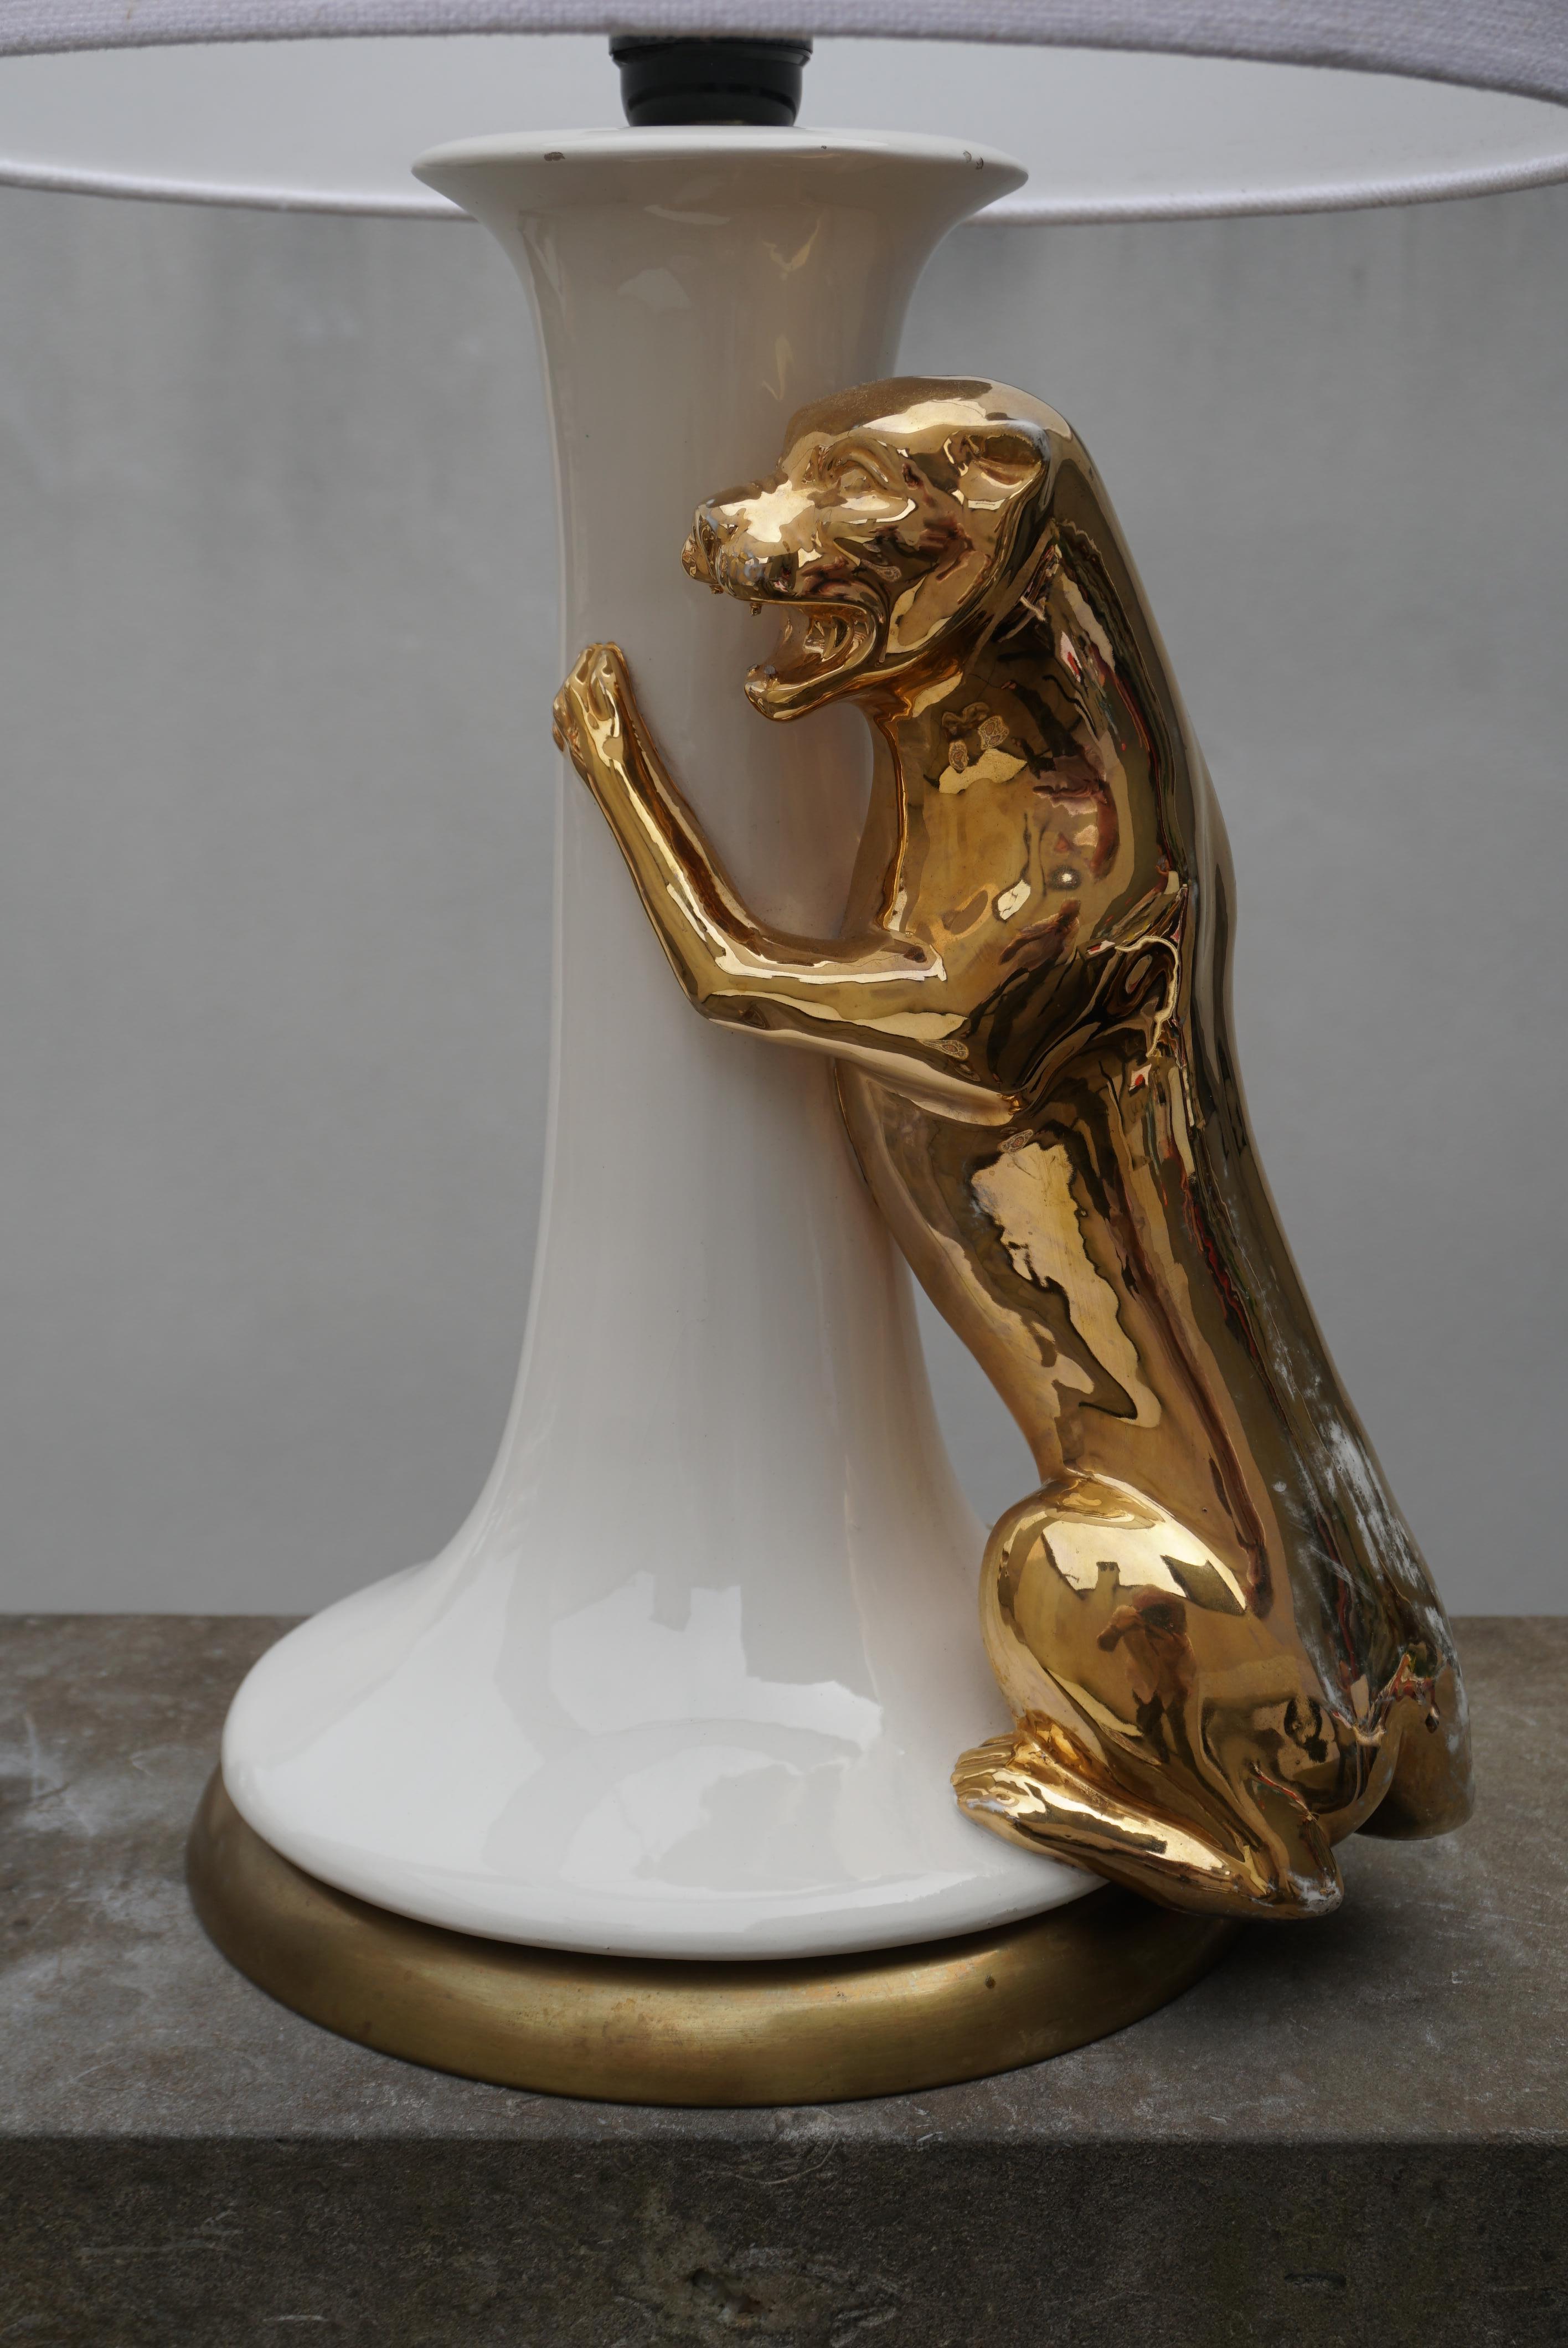 Italian Midcentury Table Lamp with Ceramic Gilt Panther, 1970s For Sale 1